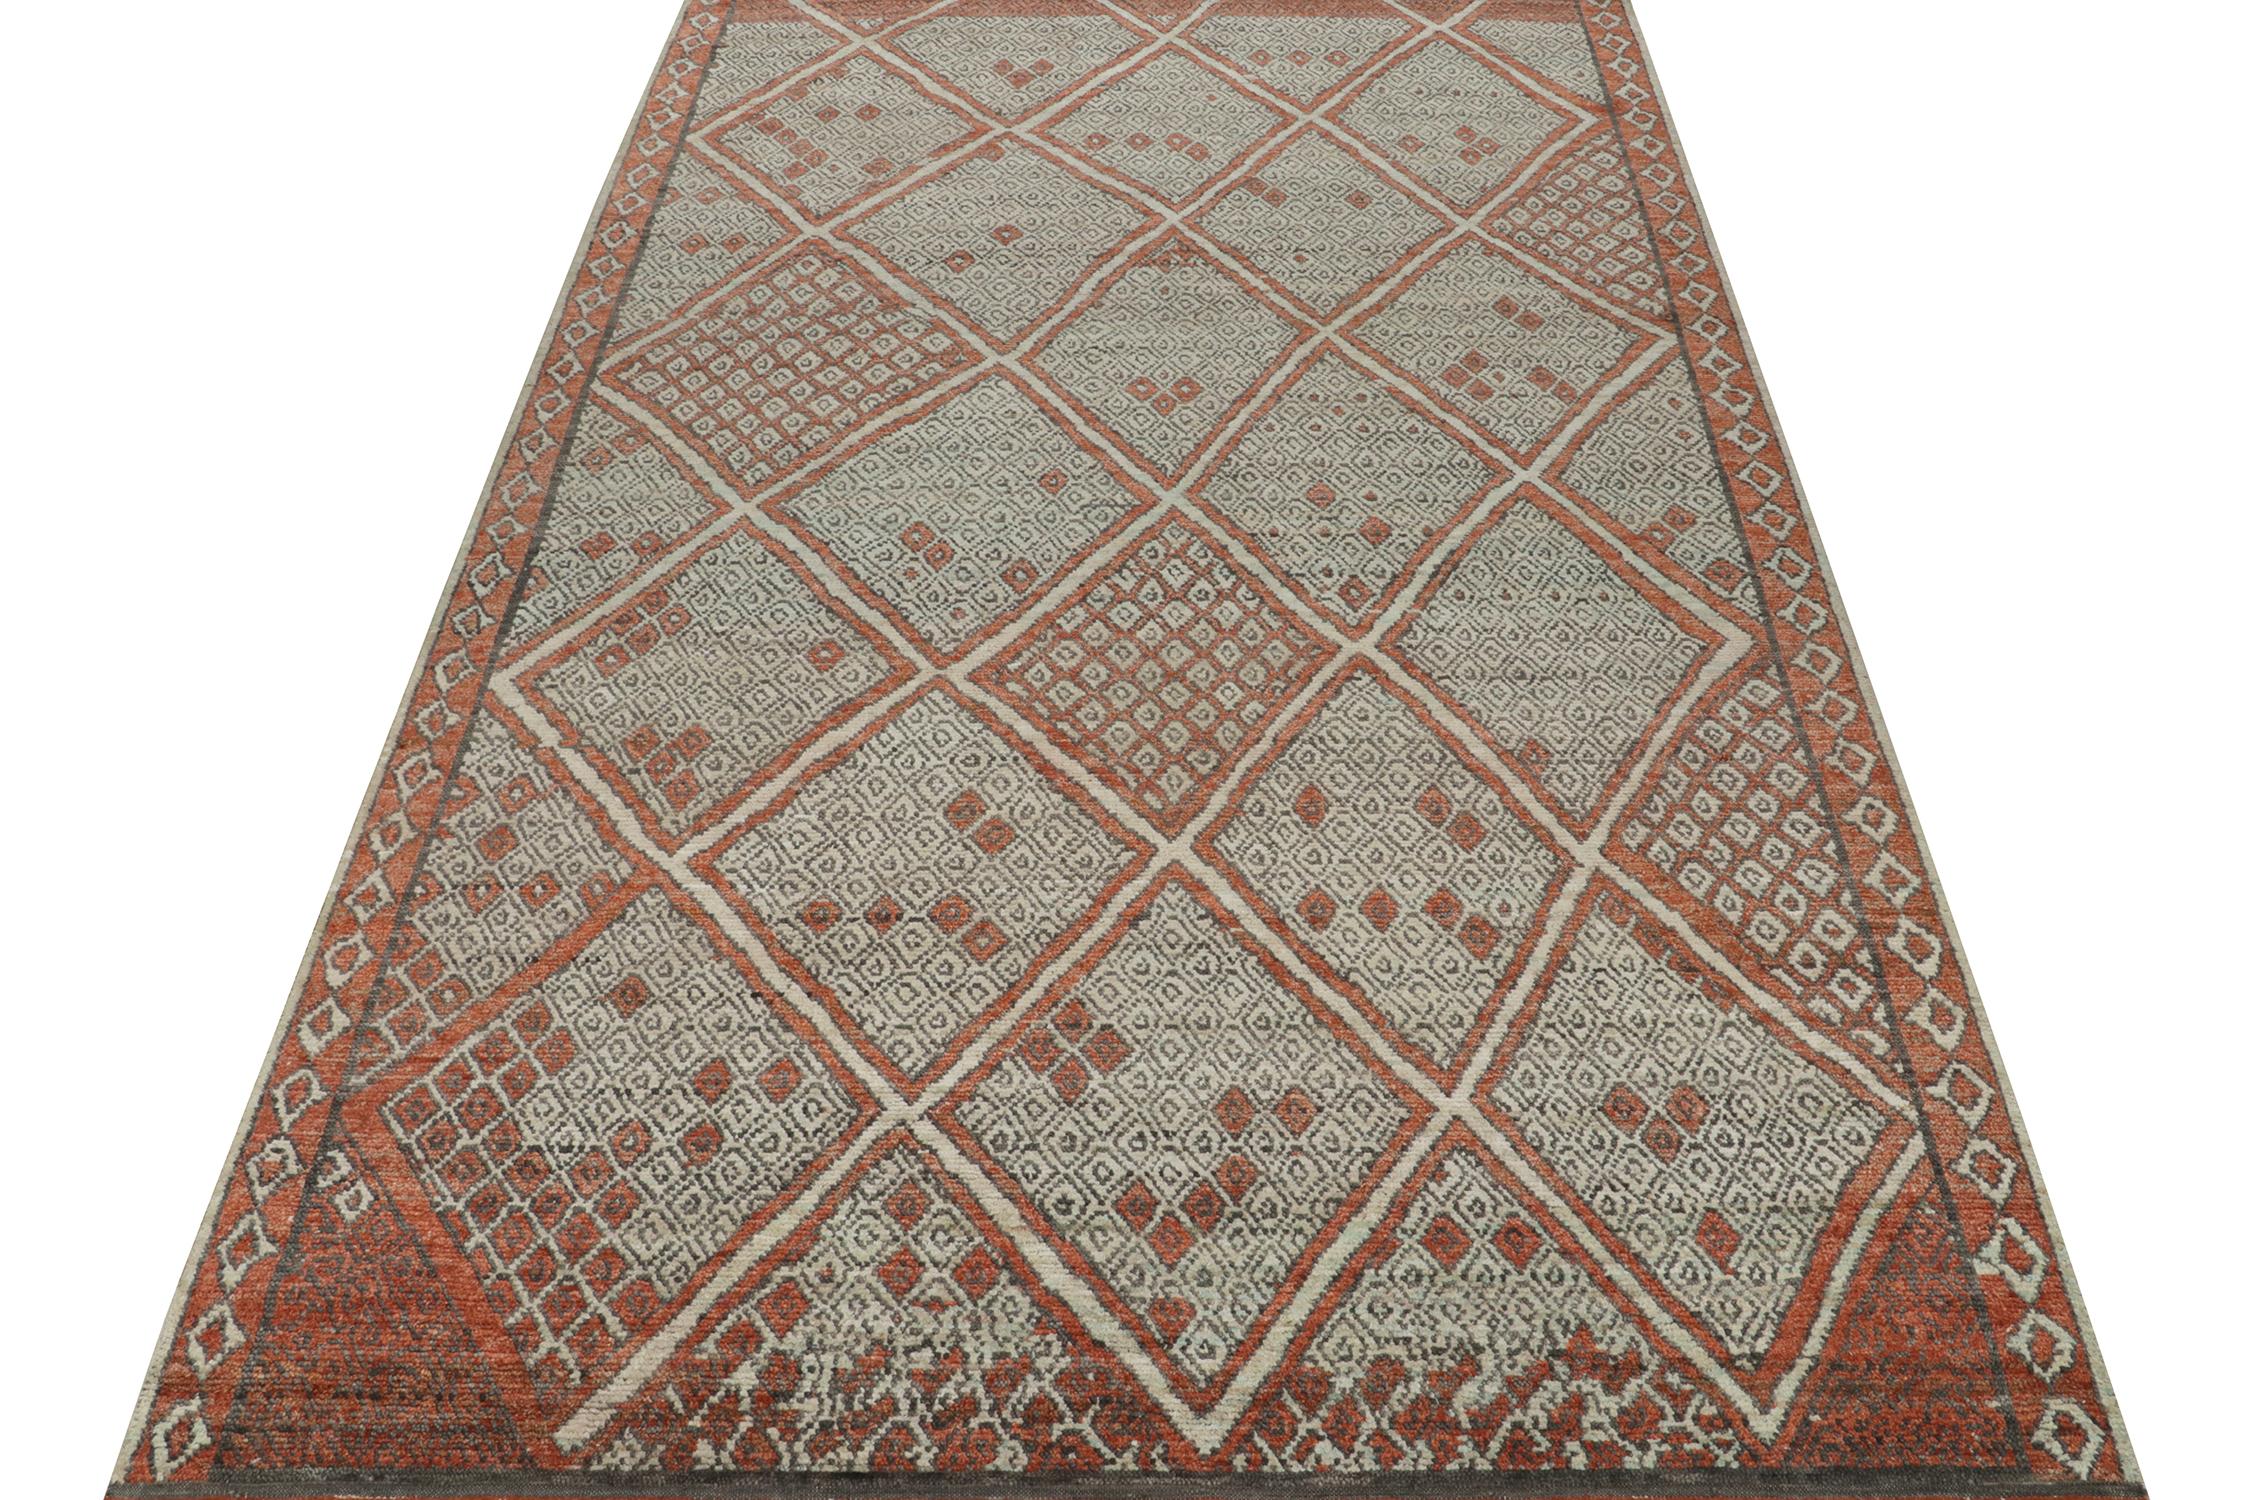 Tribal Rug & Kilim’s Moroccan Style Rug in Auburn Red and Gray Diamond Patterns For Sale